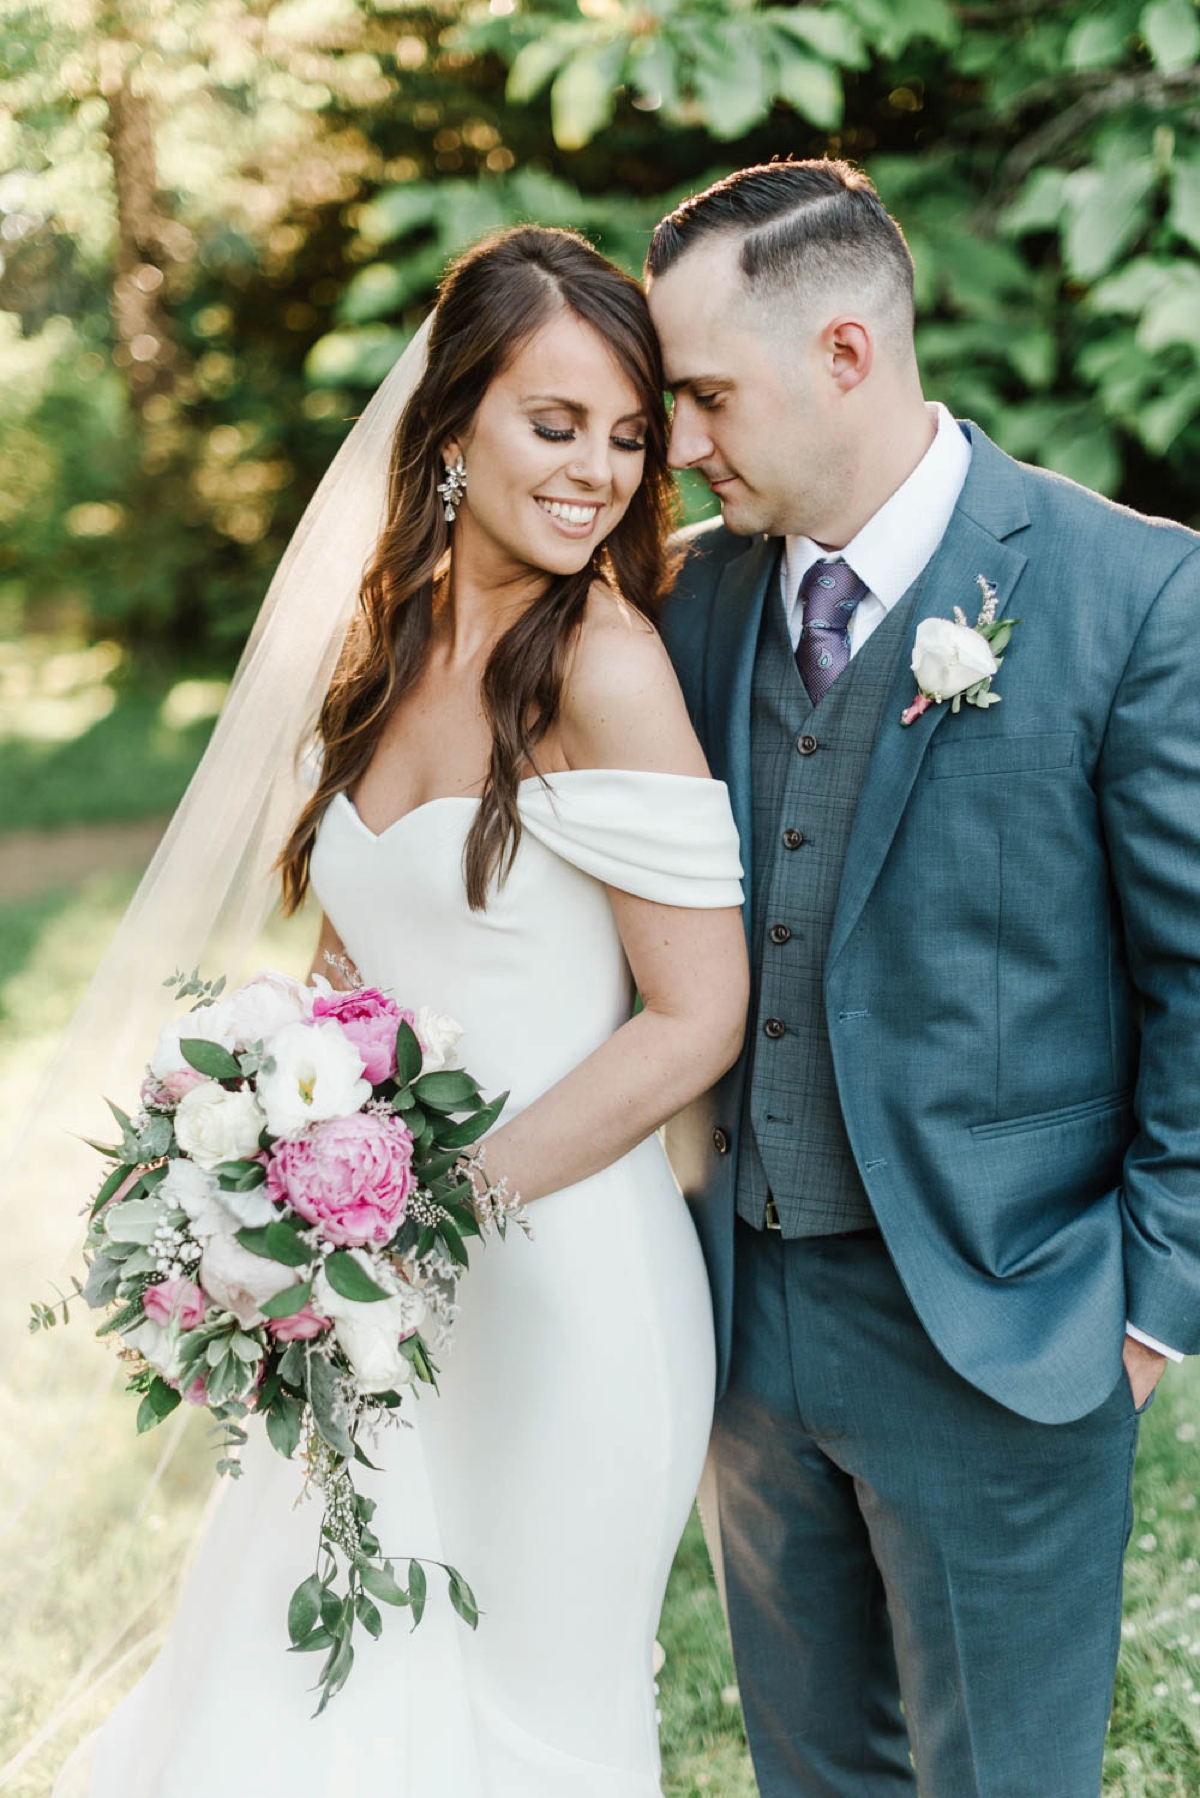 This sunny garden inspired wedding at Glen Magna Farms in Danvers, Massachusetts by Boston Wedding Photographer Annmarie Swift features beautiful floral bouquets, dusty rose bridesmaids dresses, blue suits, and a reception under sail cloth tent.